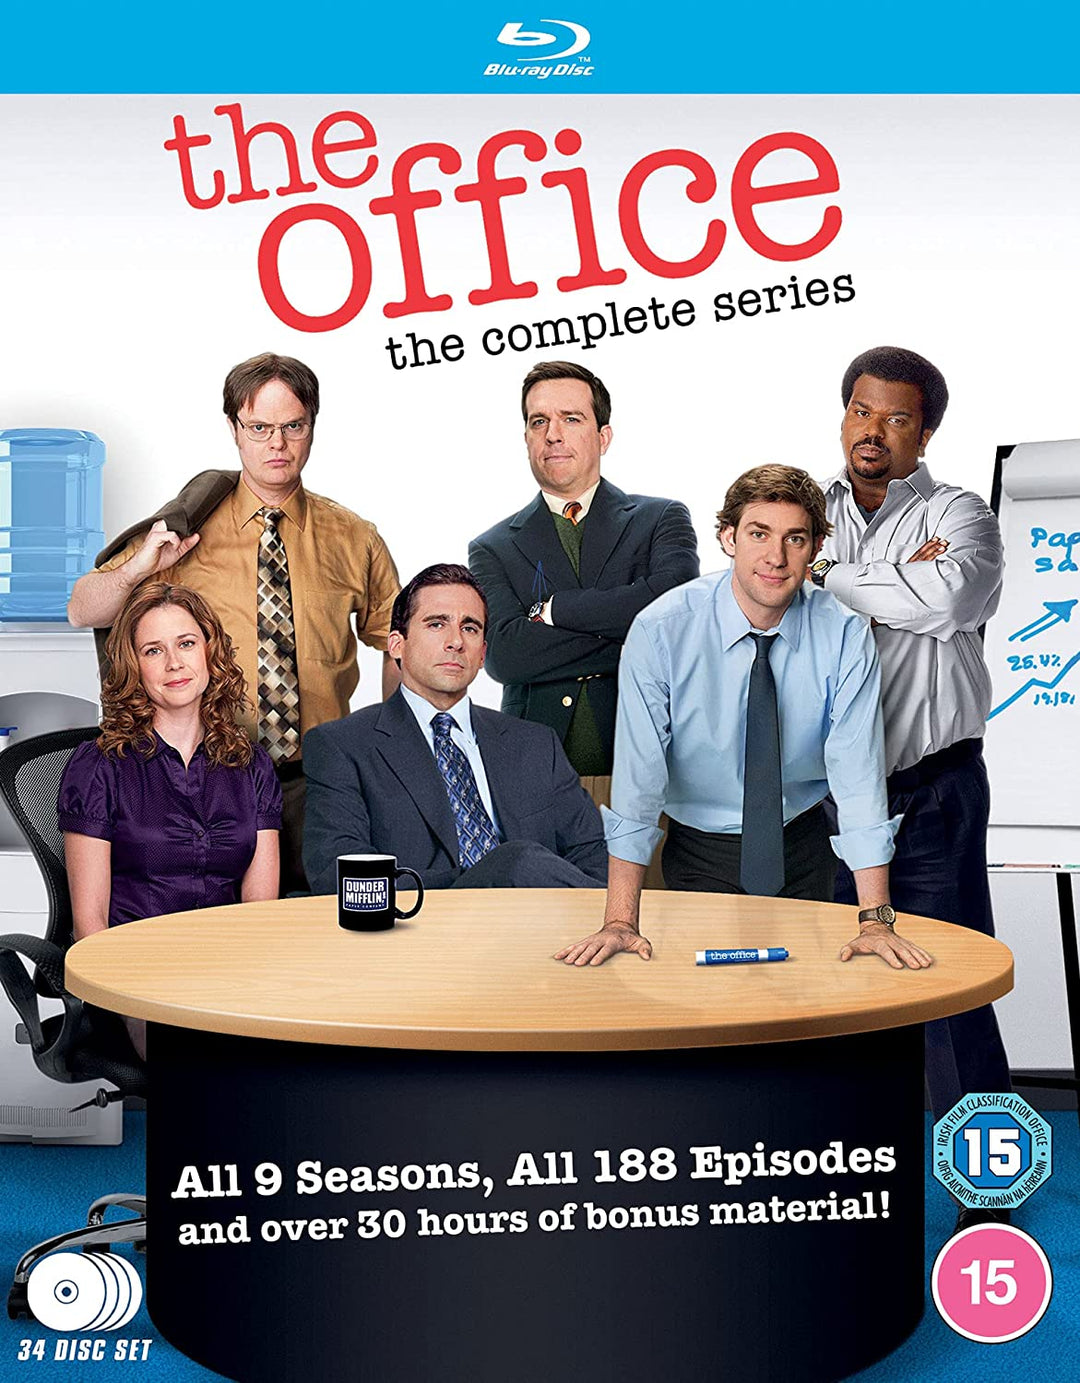 The Office: The Complete Series [2005] [Blu-ray]